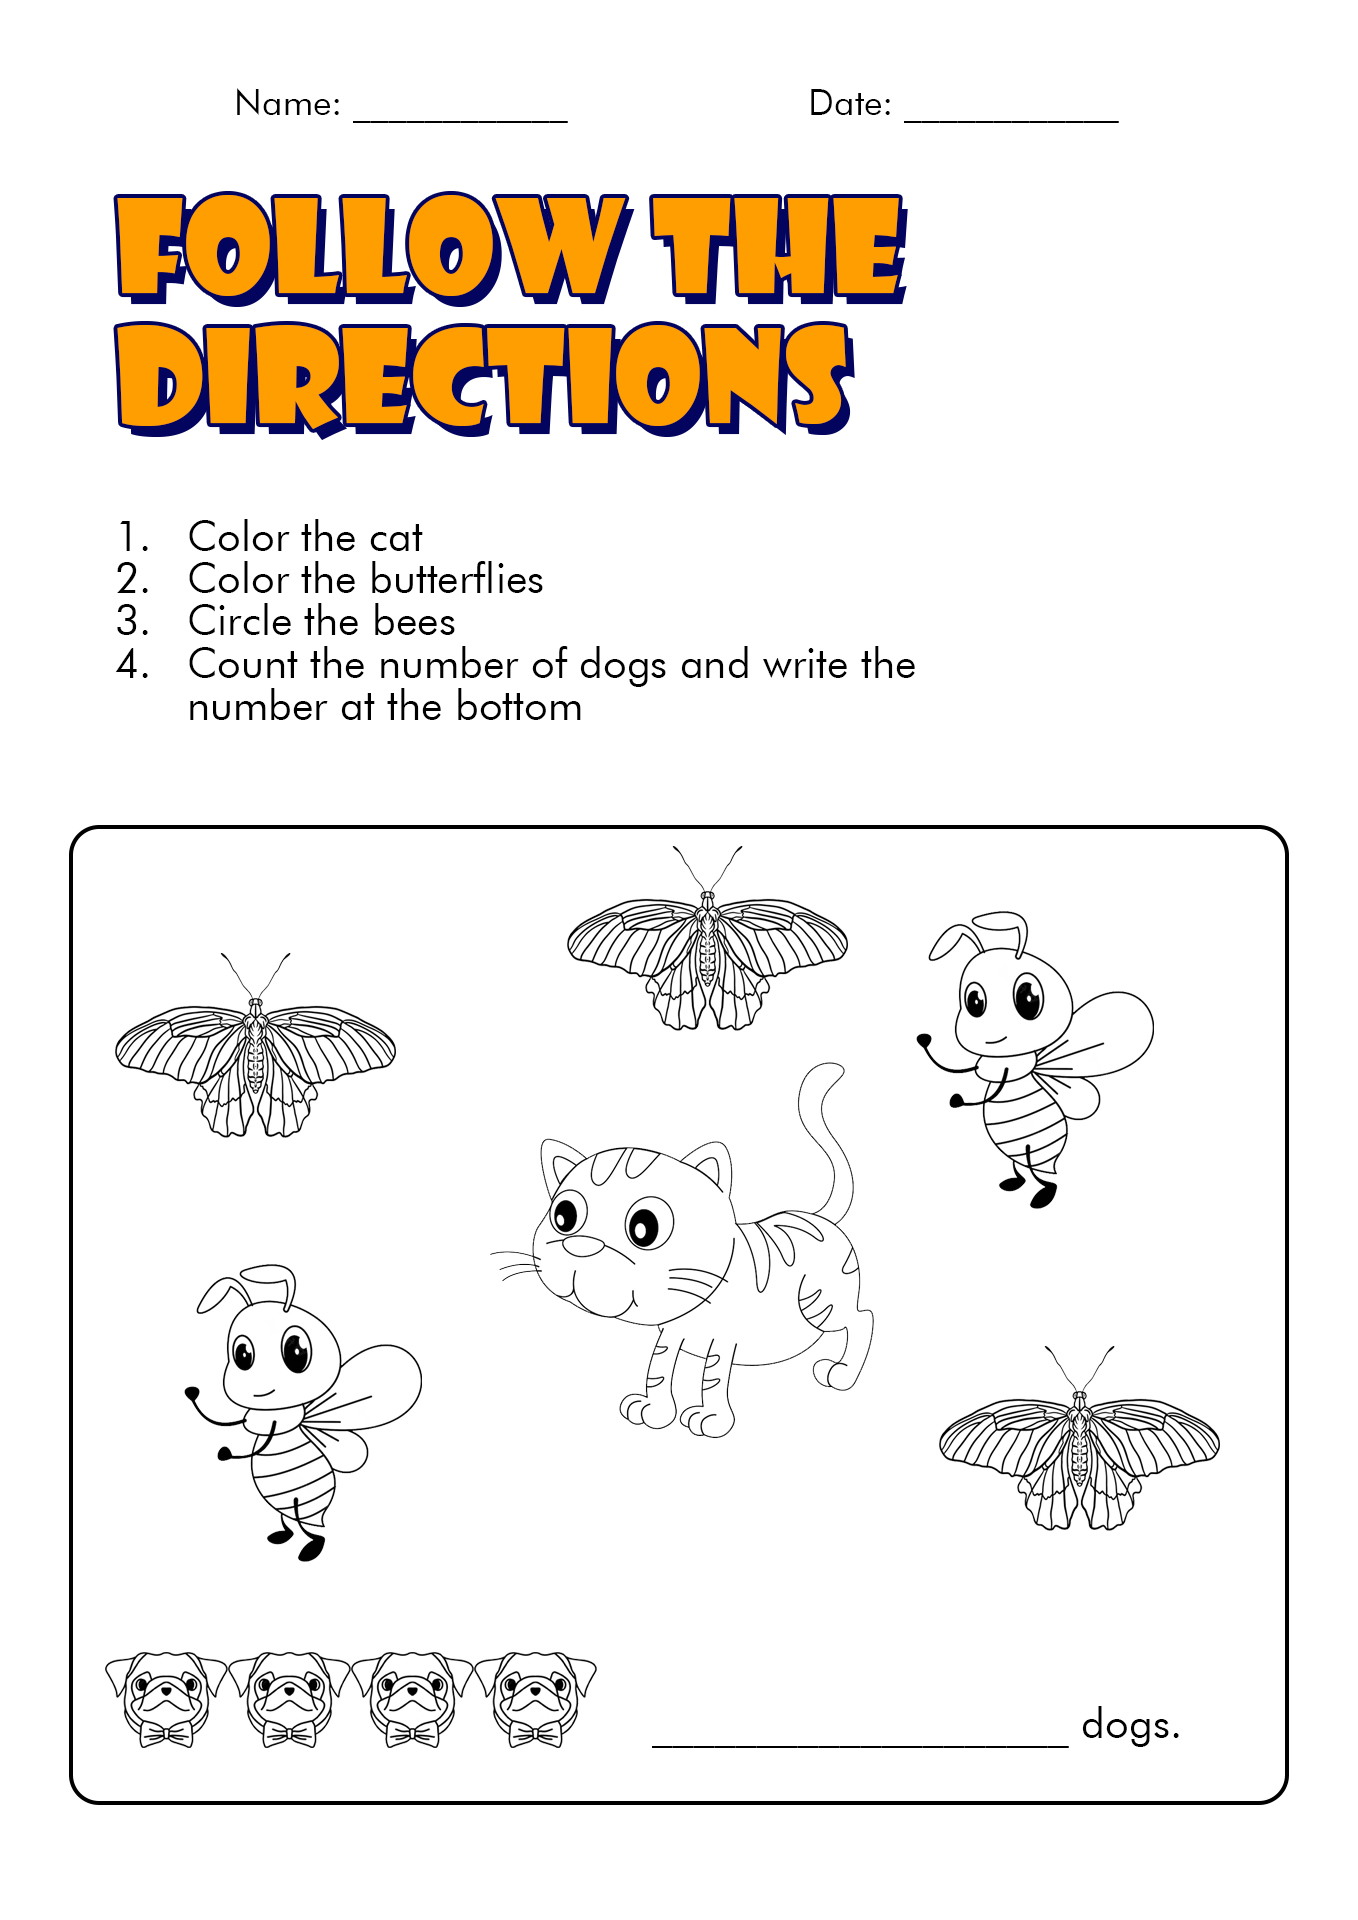 Free Following Directions Coloring Worksheets Image